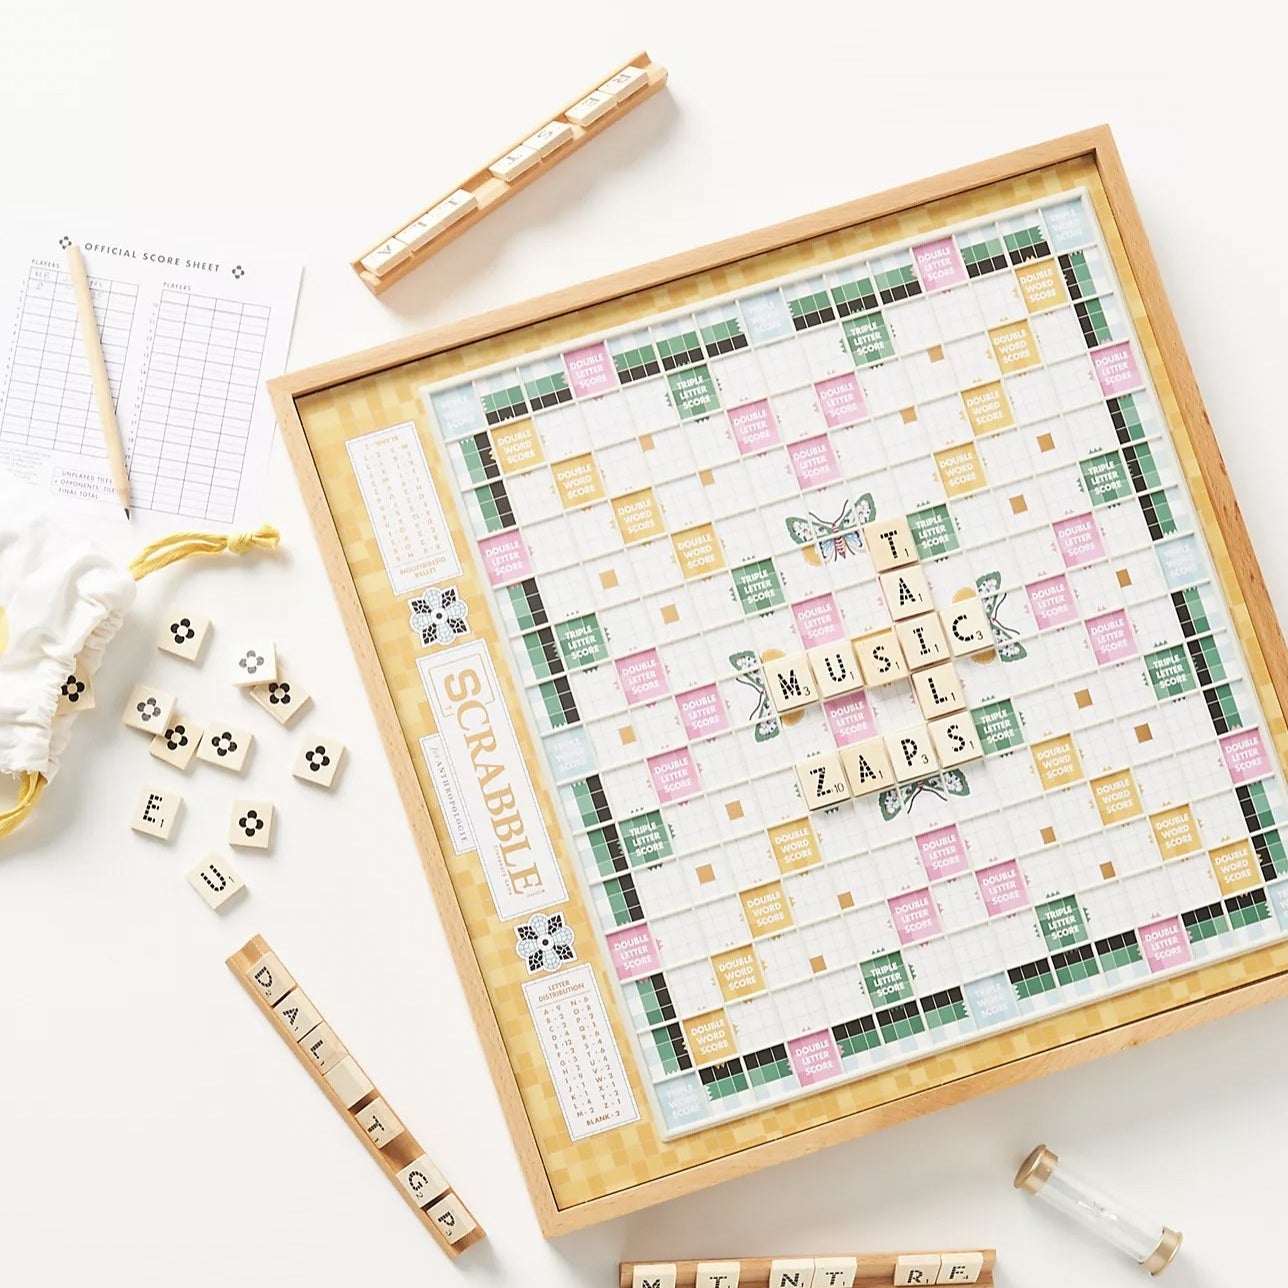 The exclusive Anthro Scrabble Board